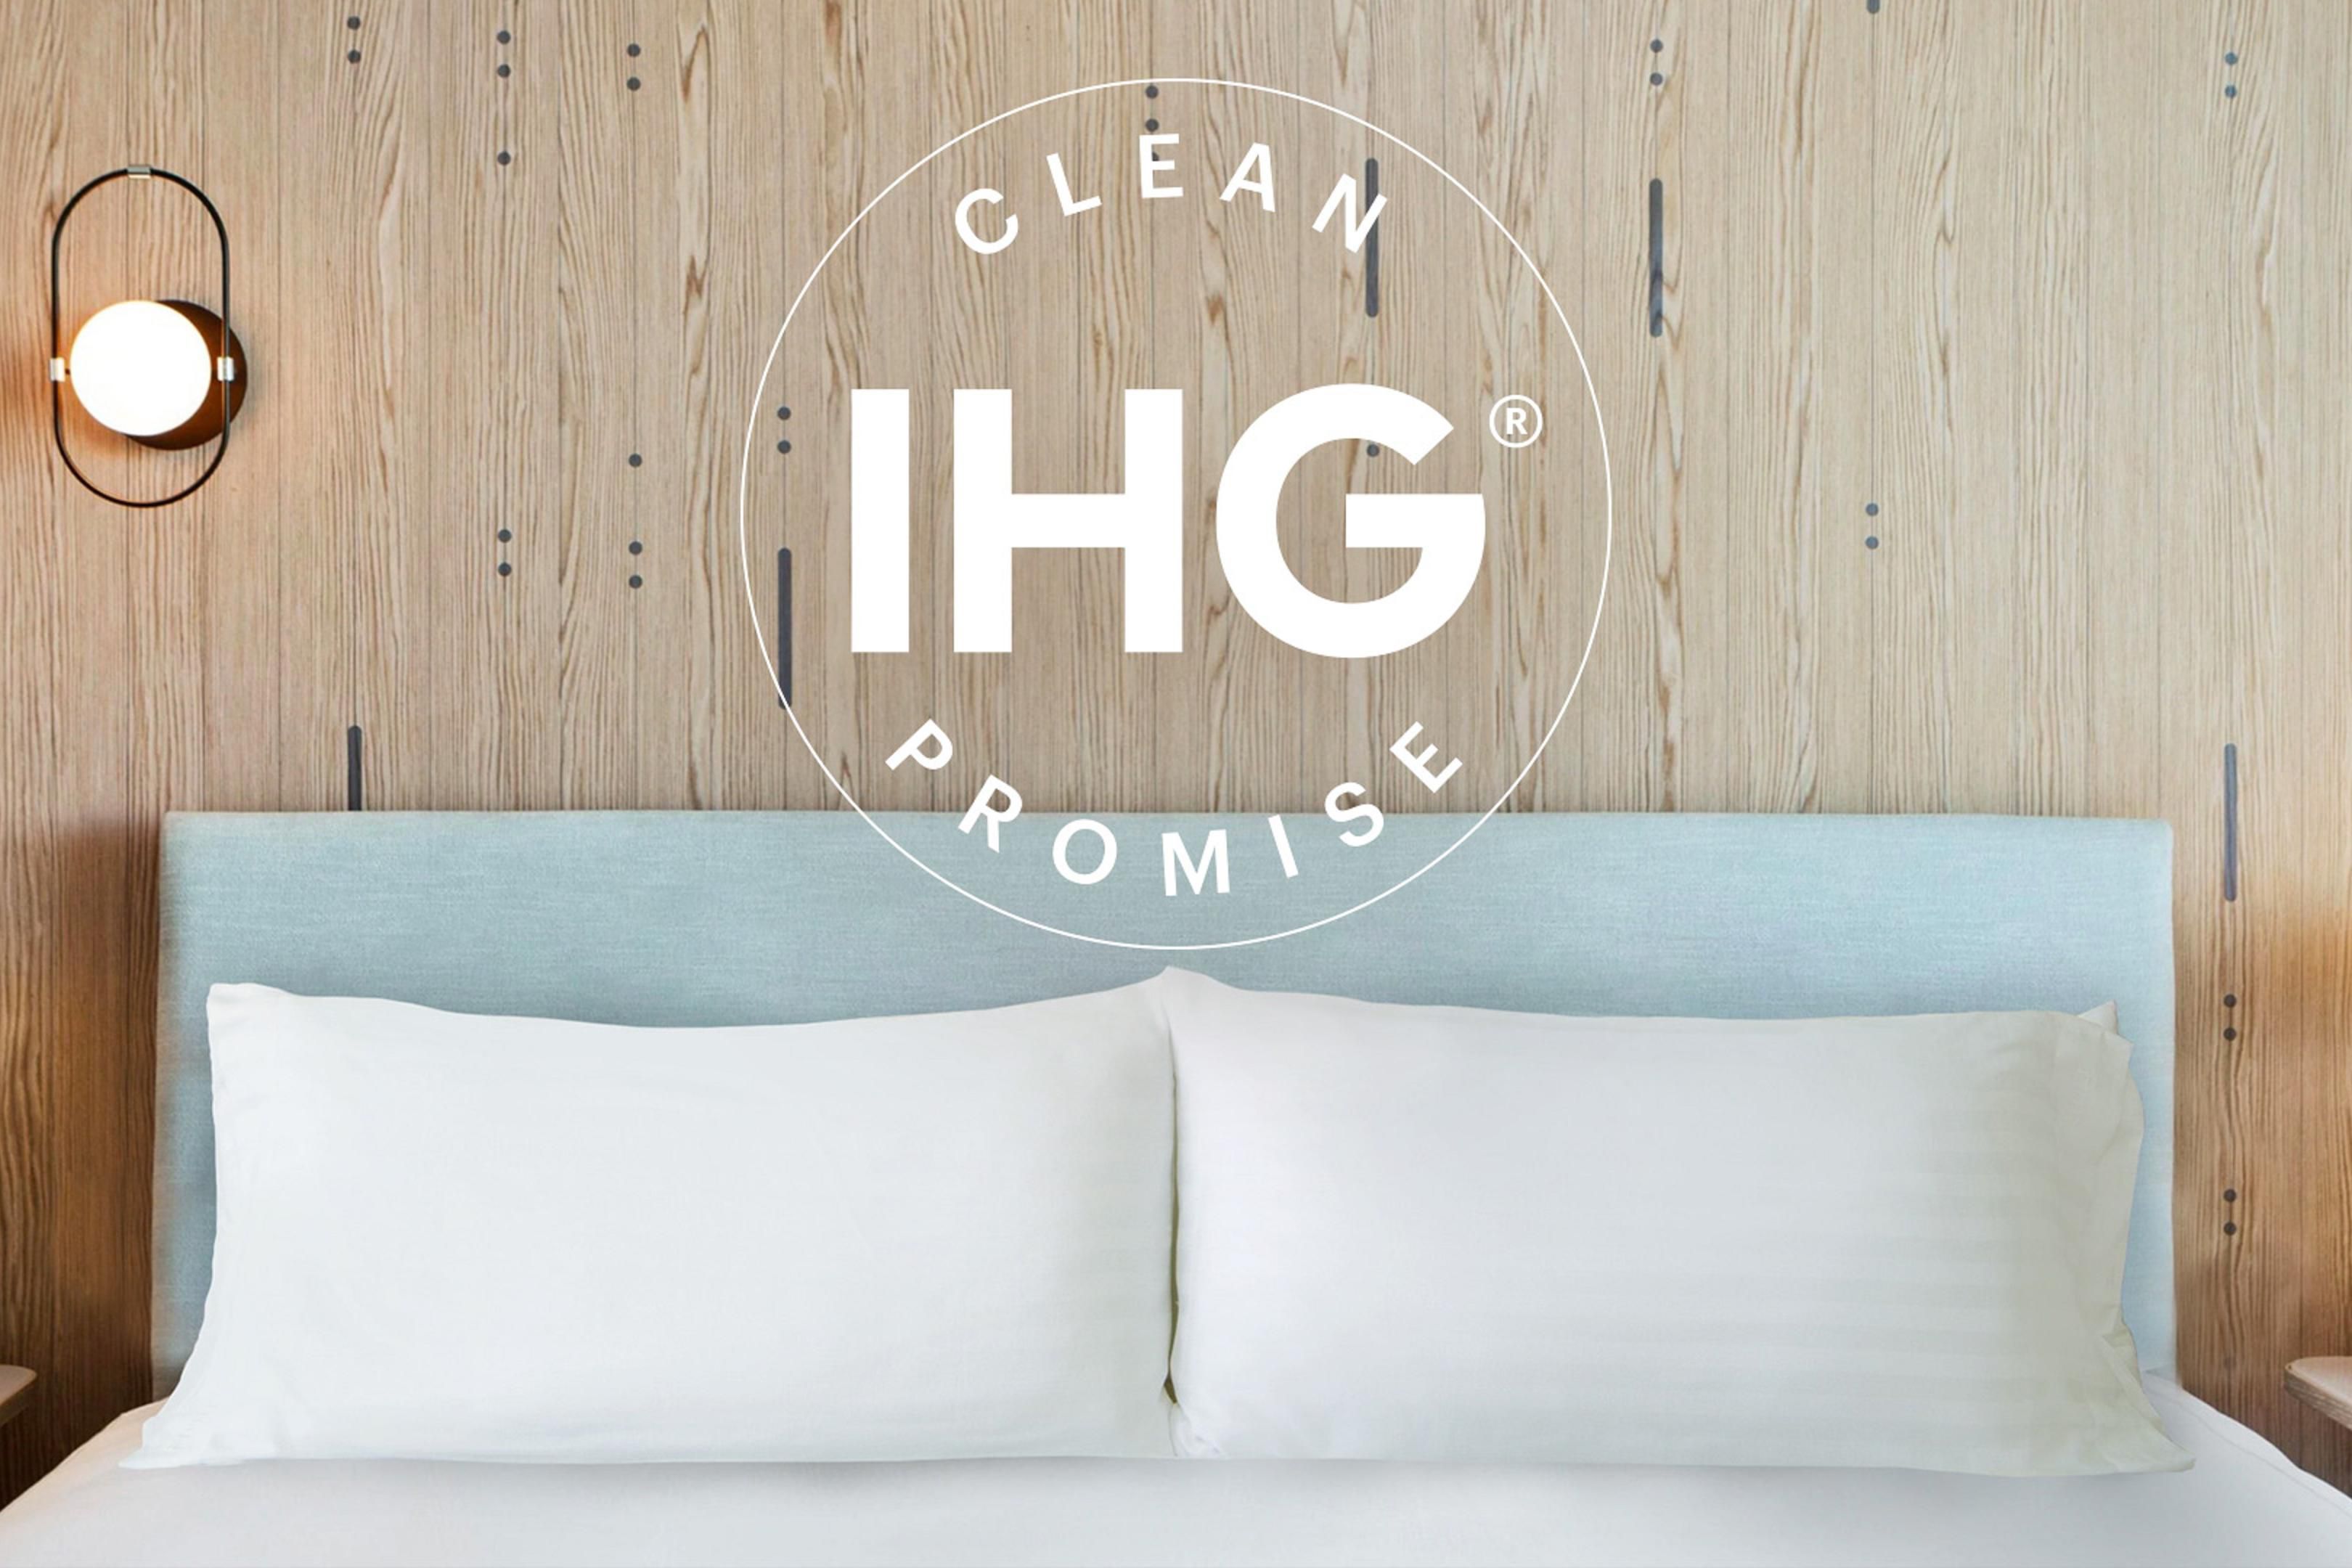 We have a long-standing commitment to rigorous cleaning procedures and launched our IHG Way of Clean programme in 2018 – developed in partnership with Ecolab and Diversey both world leaders in hygiene and cleaning technologies and services. This programme is now being expanded as “IHG Clean Promise” with additional COVID-19 protocols.